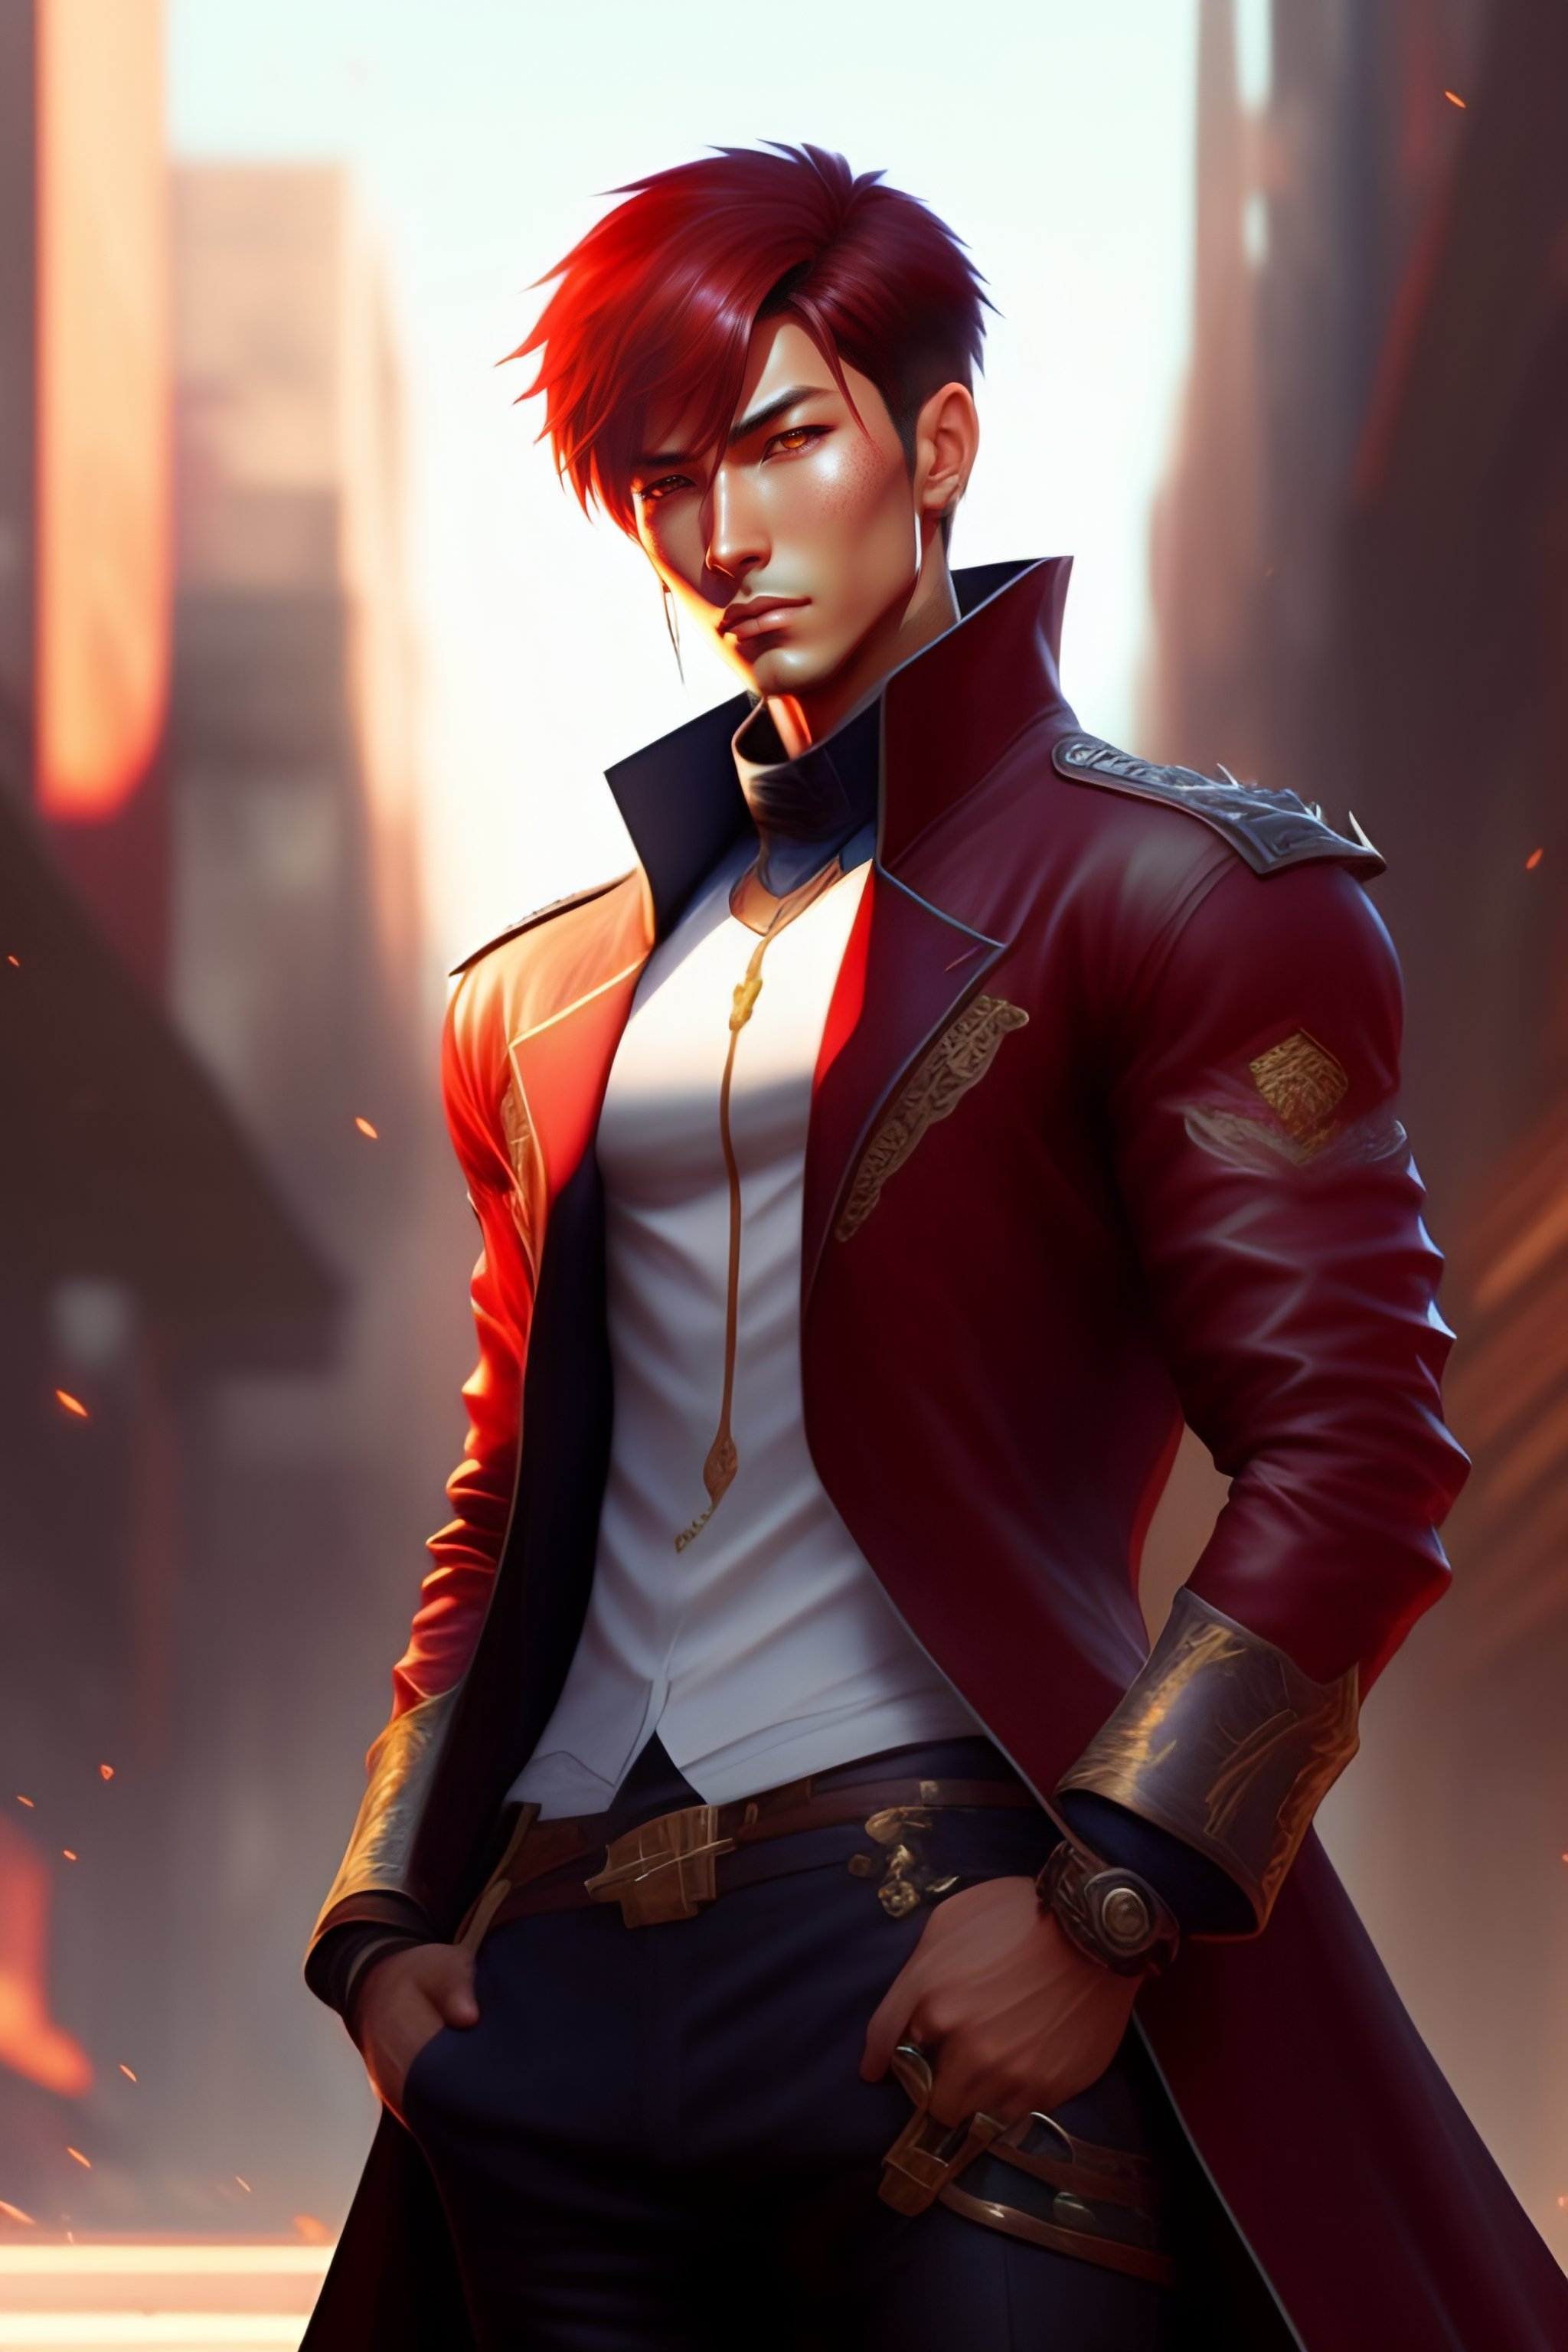 Lexica - Harmony of red abandoned city, cute handsome iori yagami